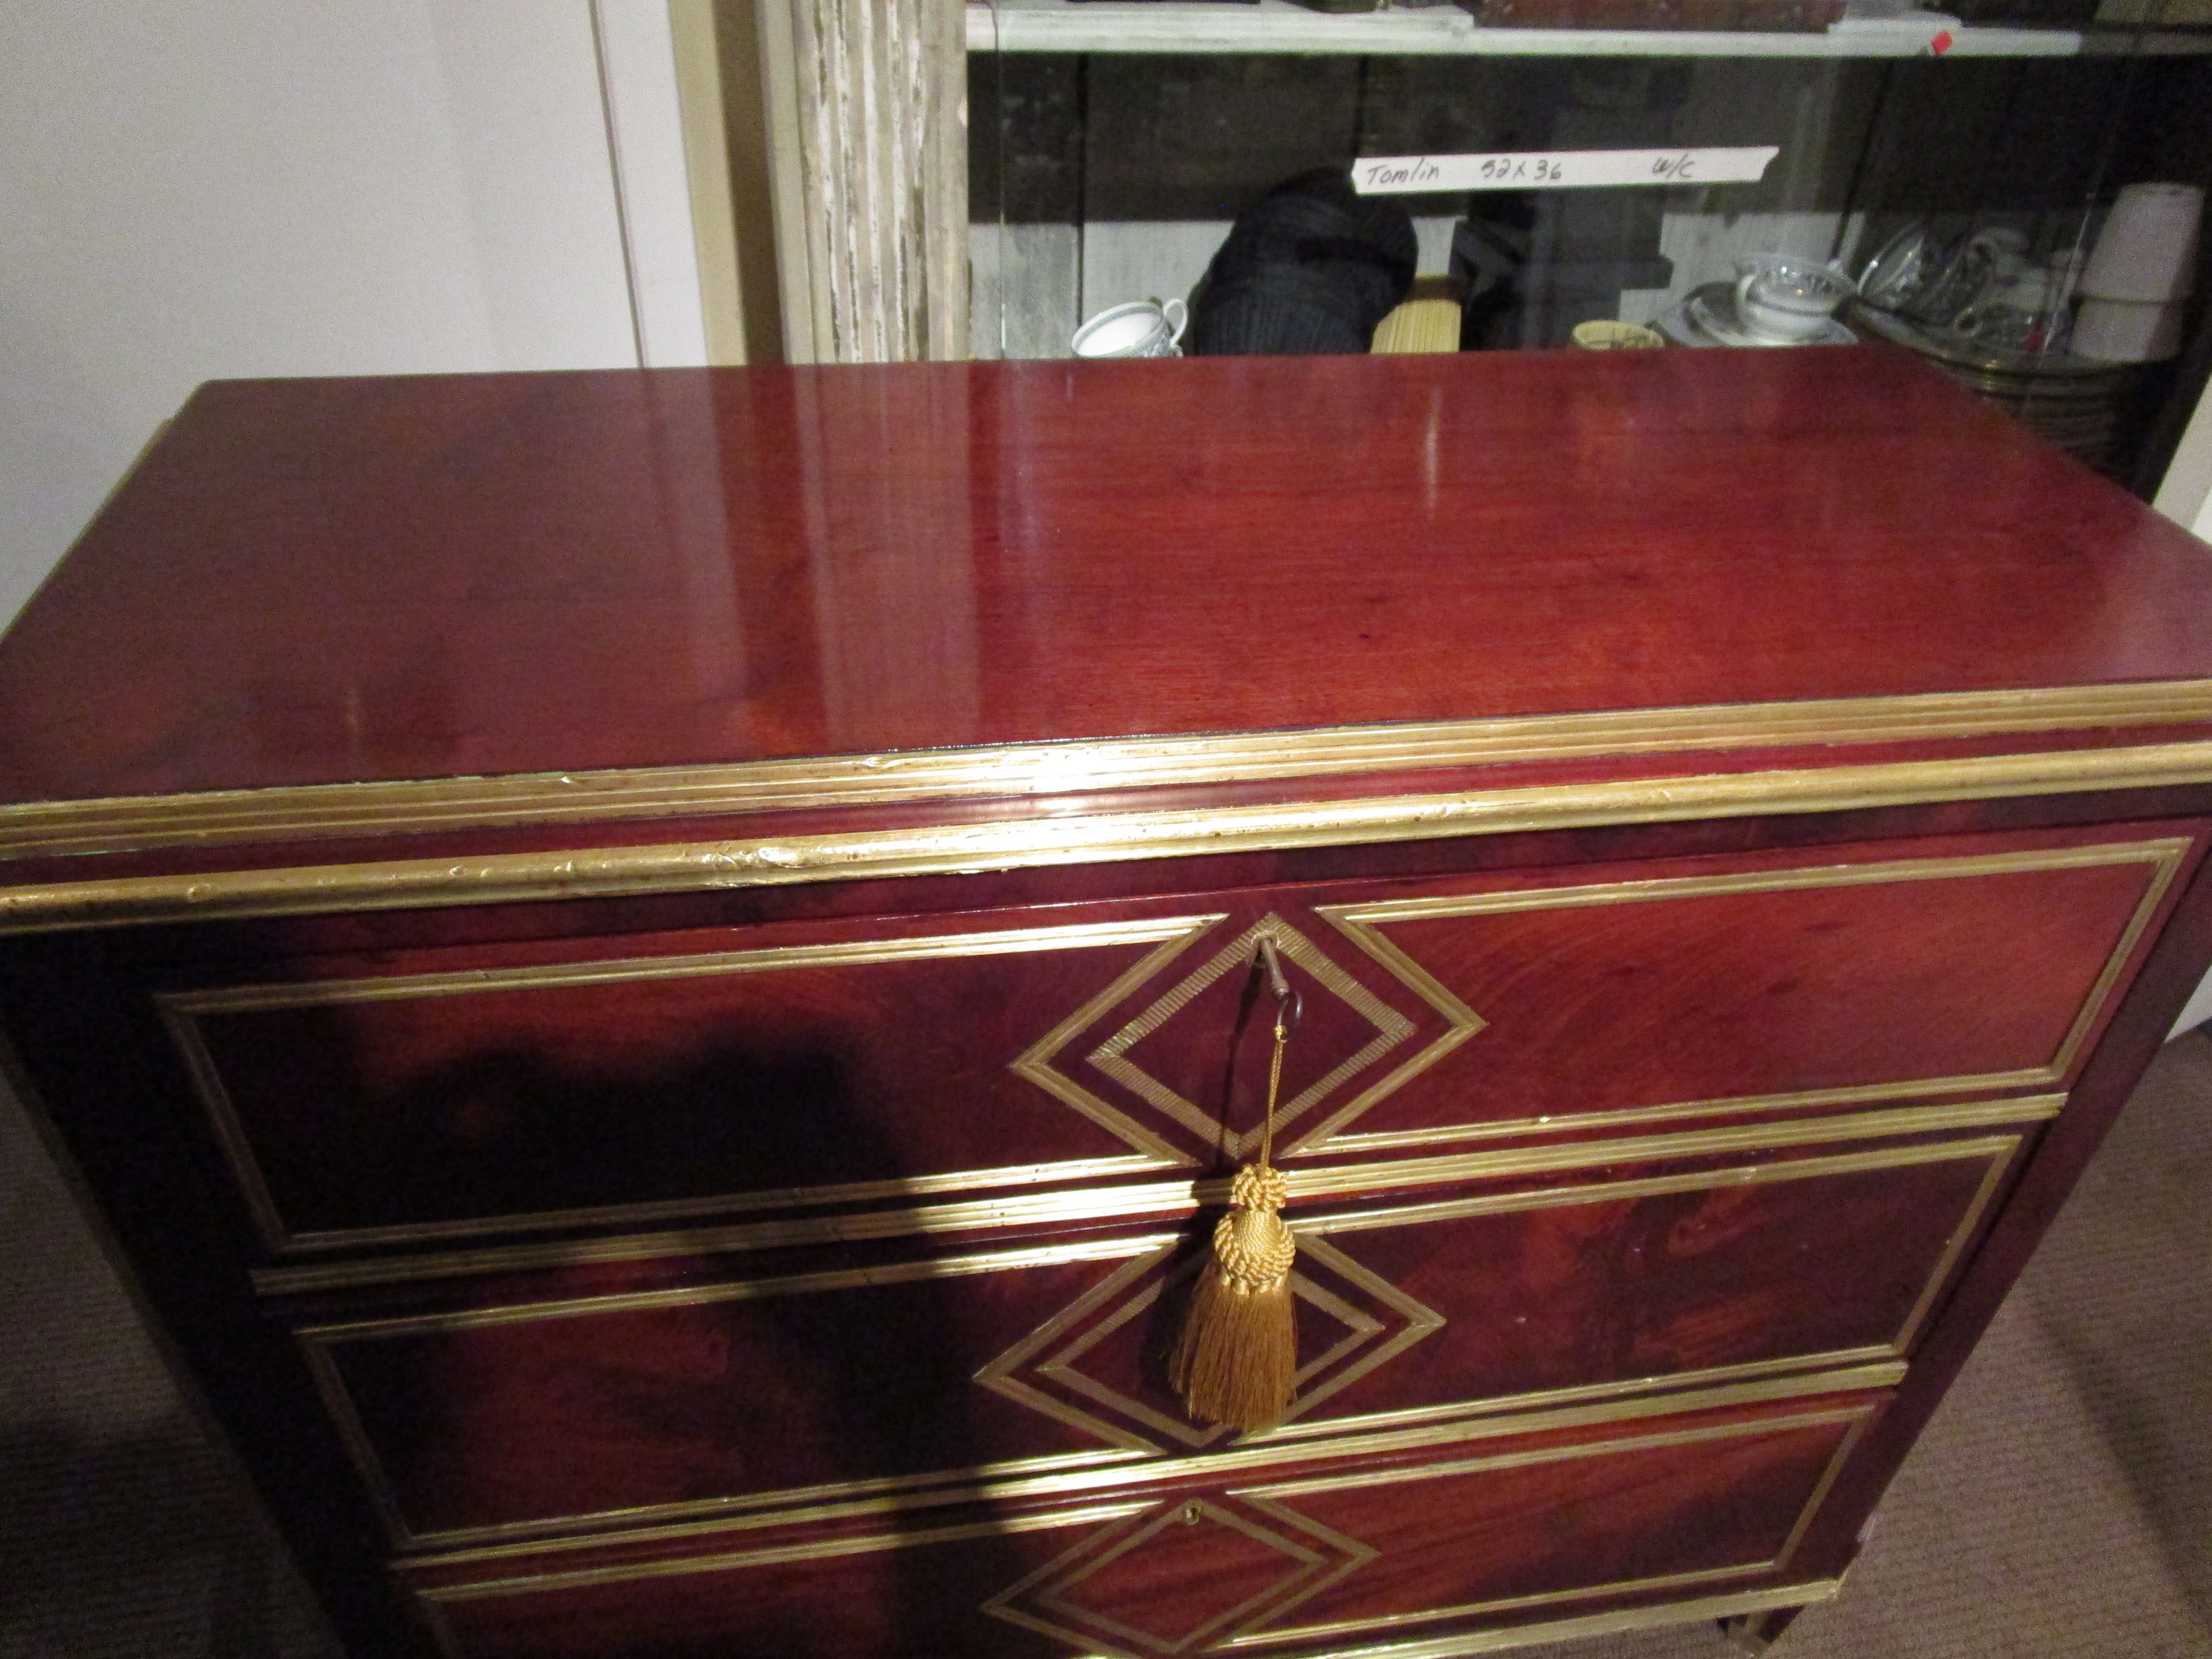 A fine 19th century Russian mahogany and hand hammered brass inlayed commode. All original.